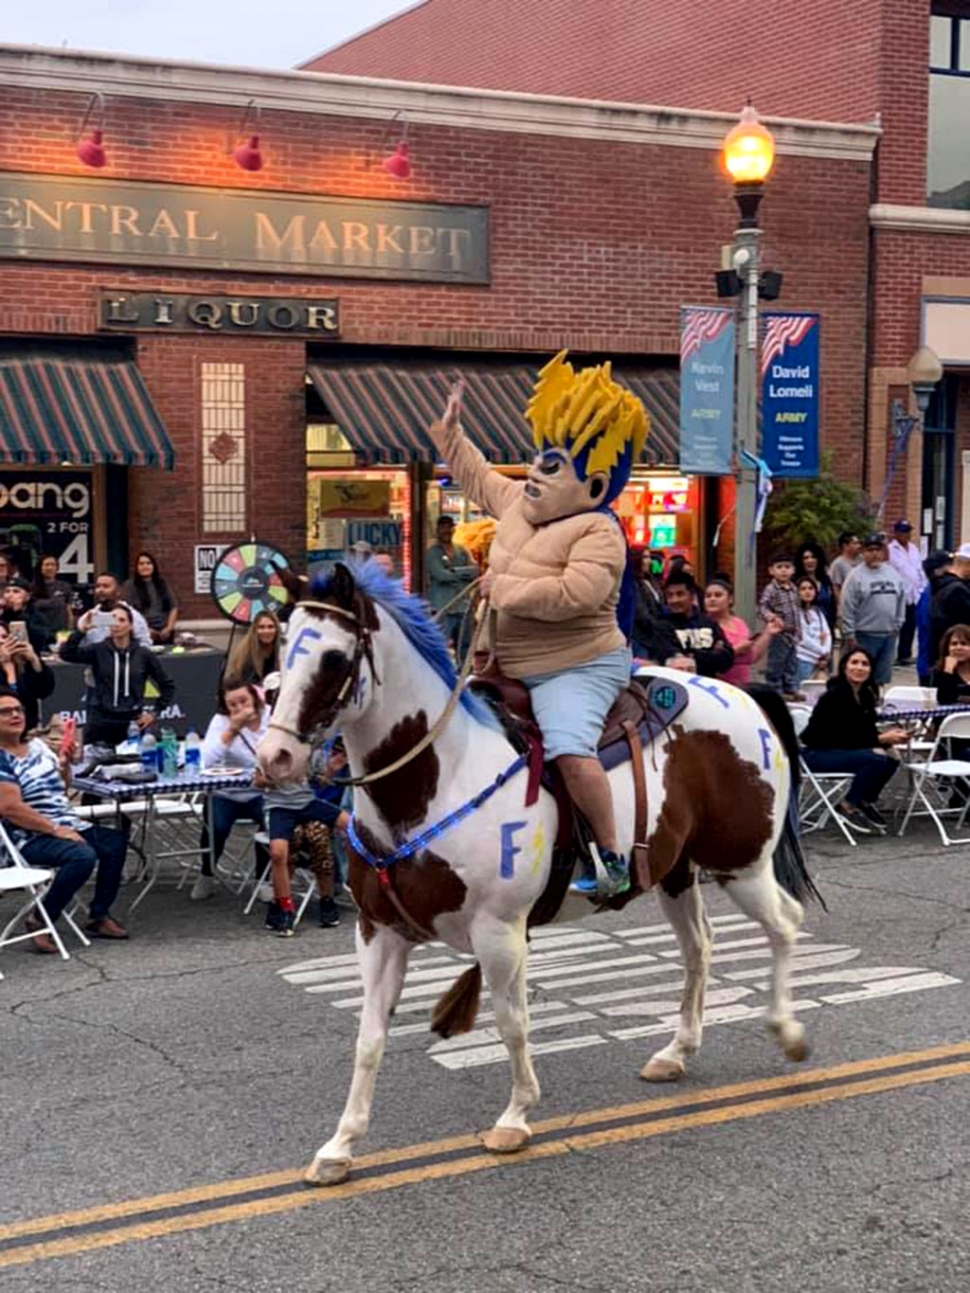 Last Thursday, September 26th at 6:30 p.m., crowds of people lined up down Central Avenue as the Fillmore Alumni Association hosted their annual Blue & White Night and Fillmore High School’s 2019 Homecoming Parade. Pictured above is the Fillmore High Mascot the “Flashman”, as he rides in on his horse waving to the crowd, getting them pumped up for Friday night’s game against Carpinteria. Photos courtesy Mark Ortega of FHS Alumni President.